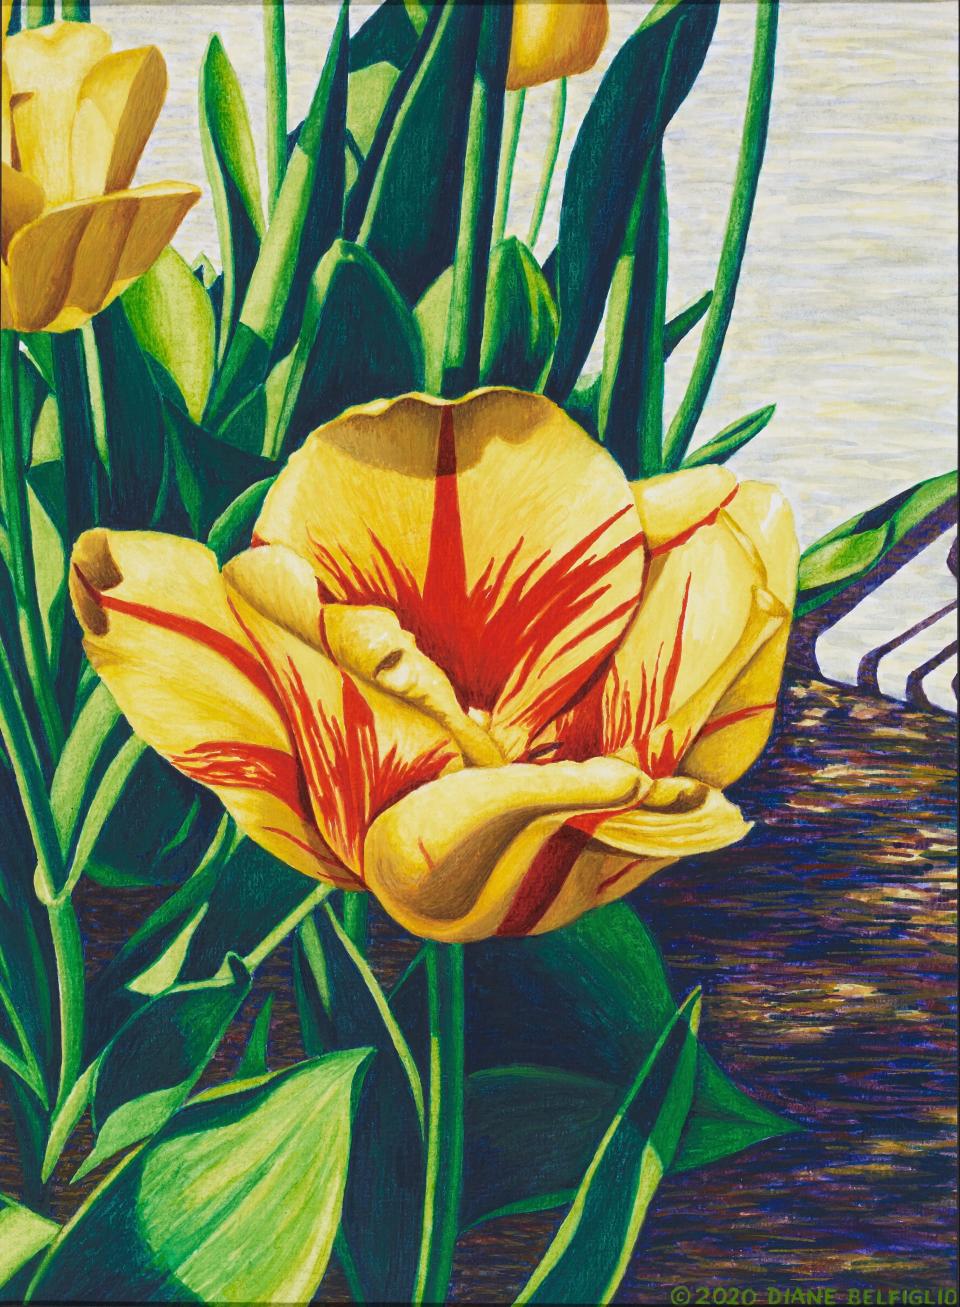 "Artist's Journey," an exhibit of late Stark County artist Diane Belfiglio, was on display at the Little Art Gallery at North Canton Public Library in 2021.